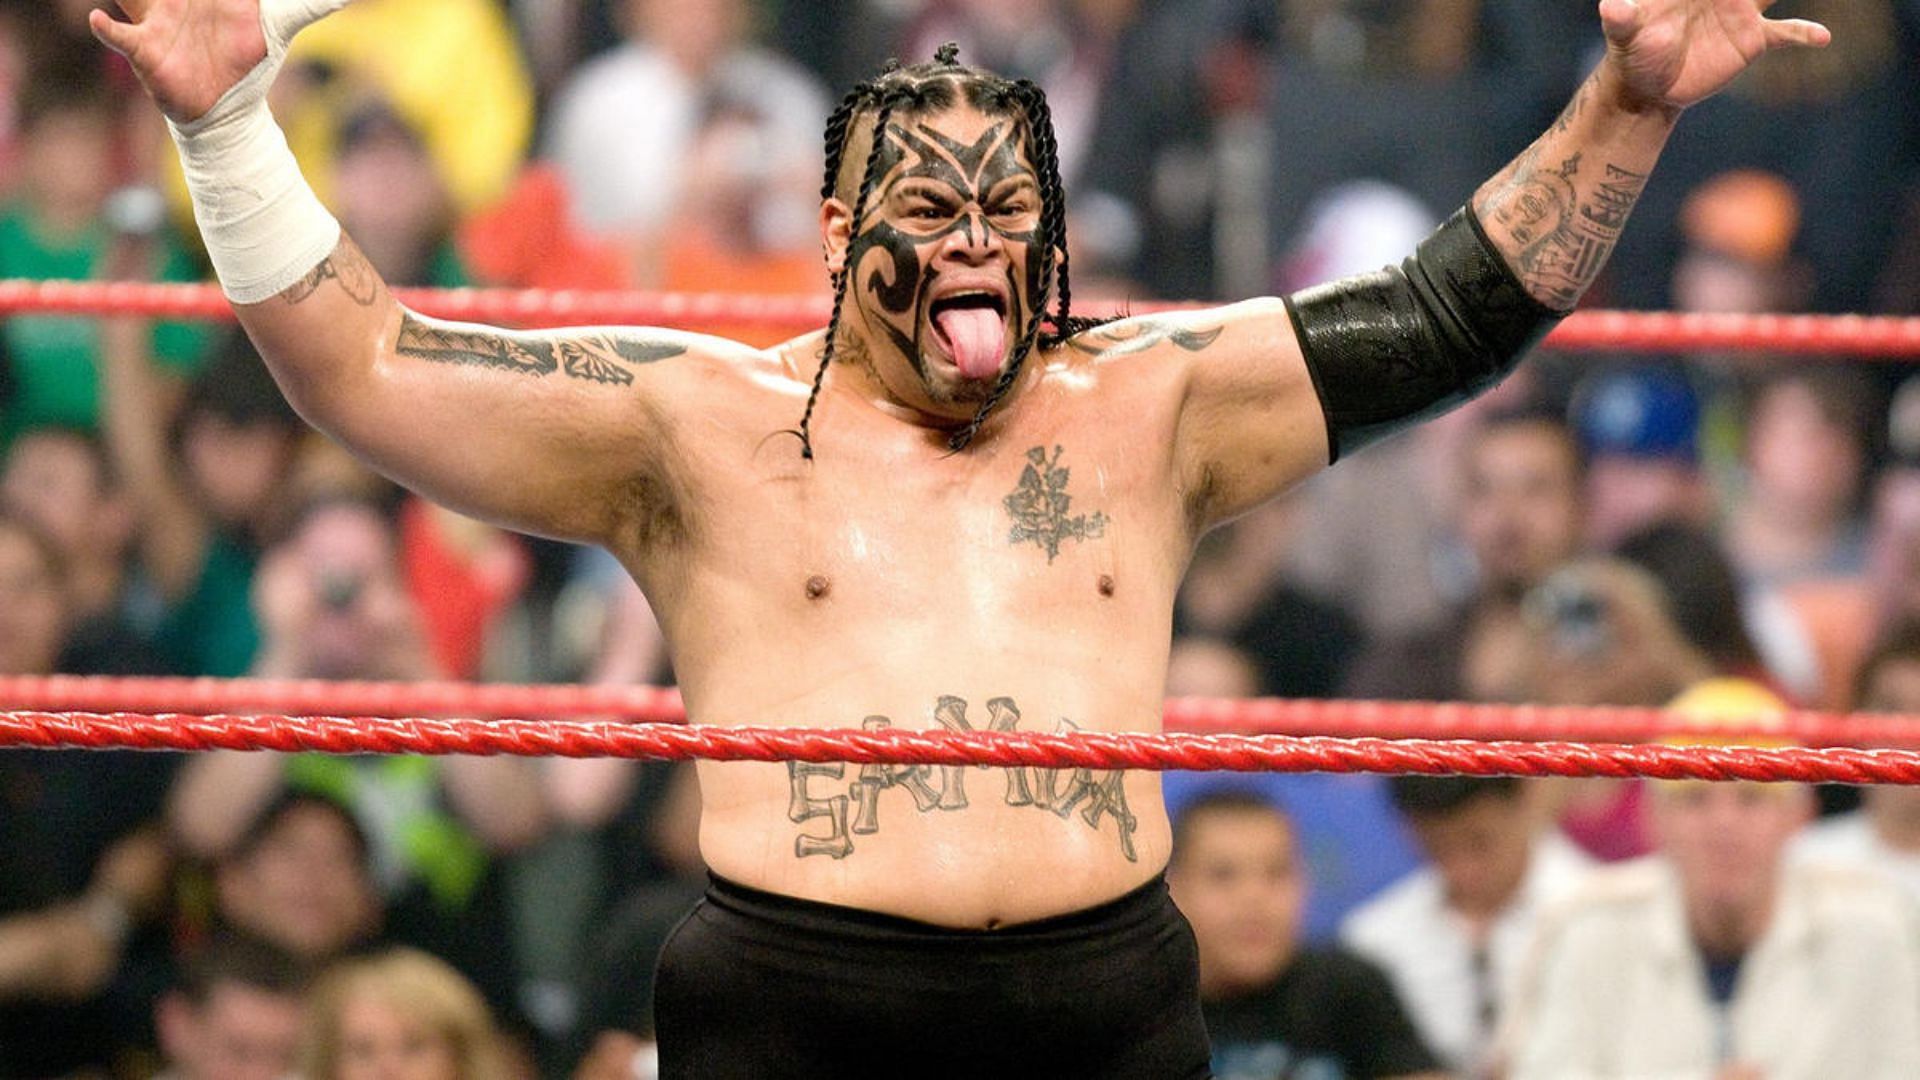 Umaga passed away in December 2009 at the age of 36